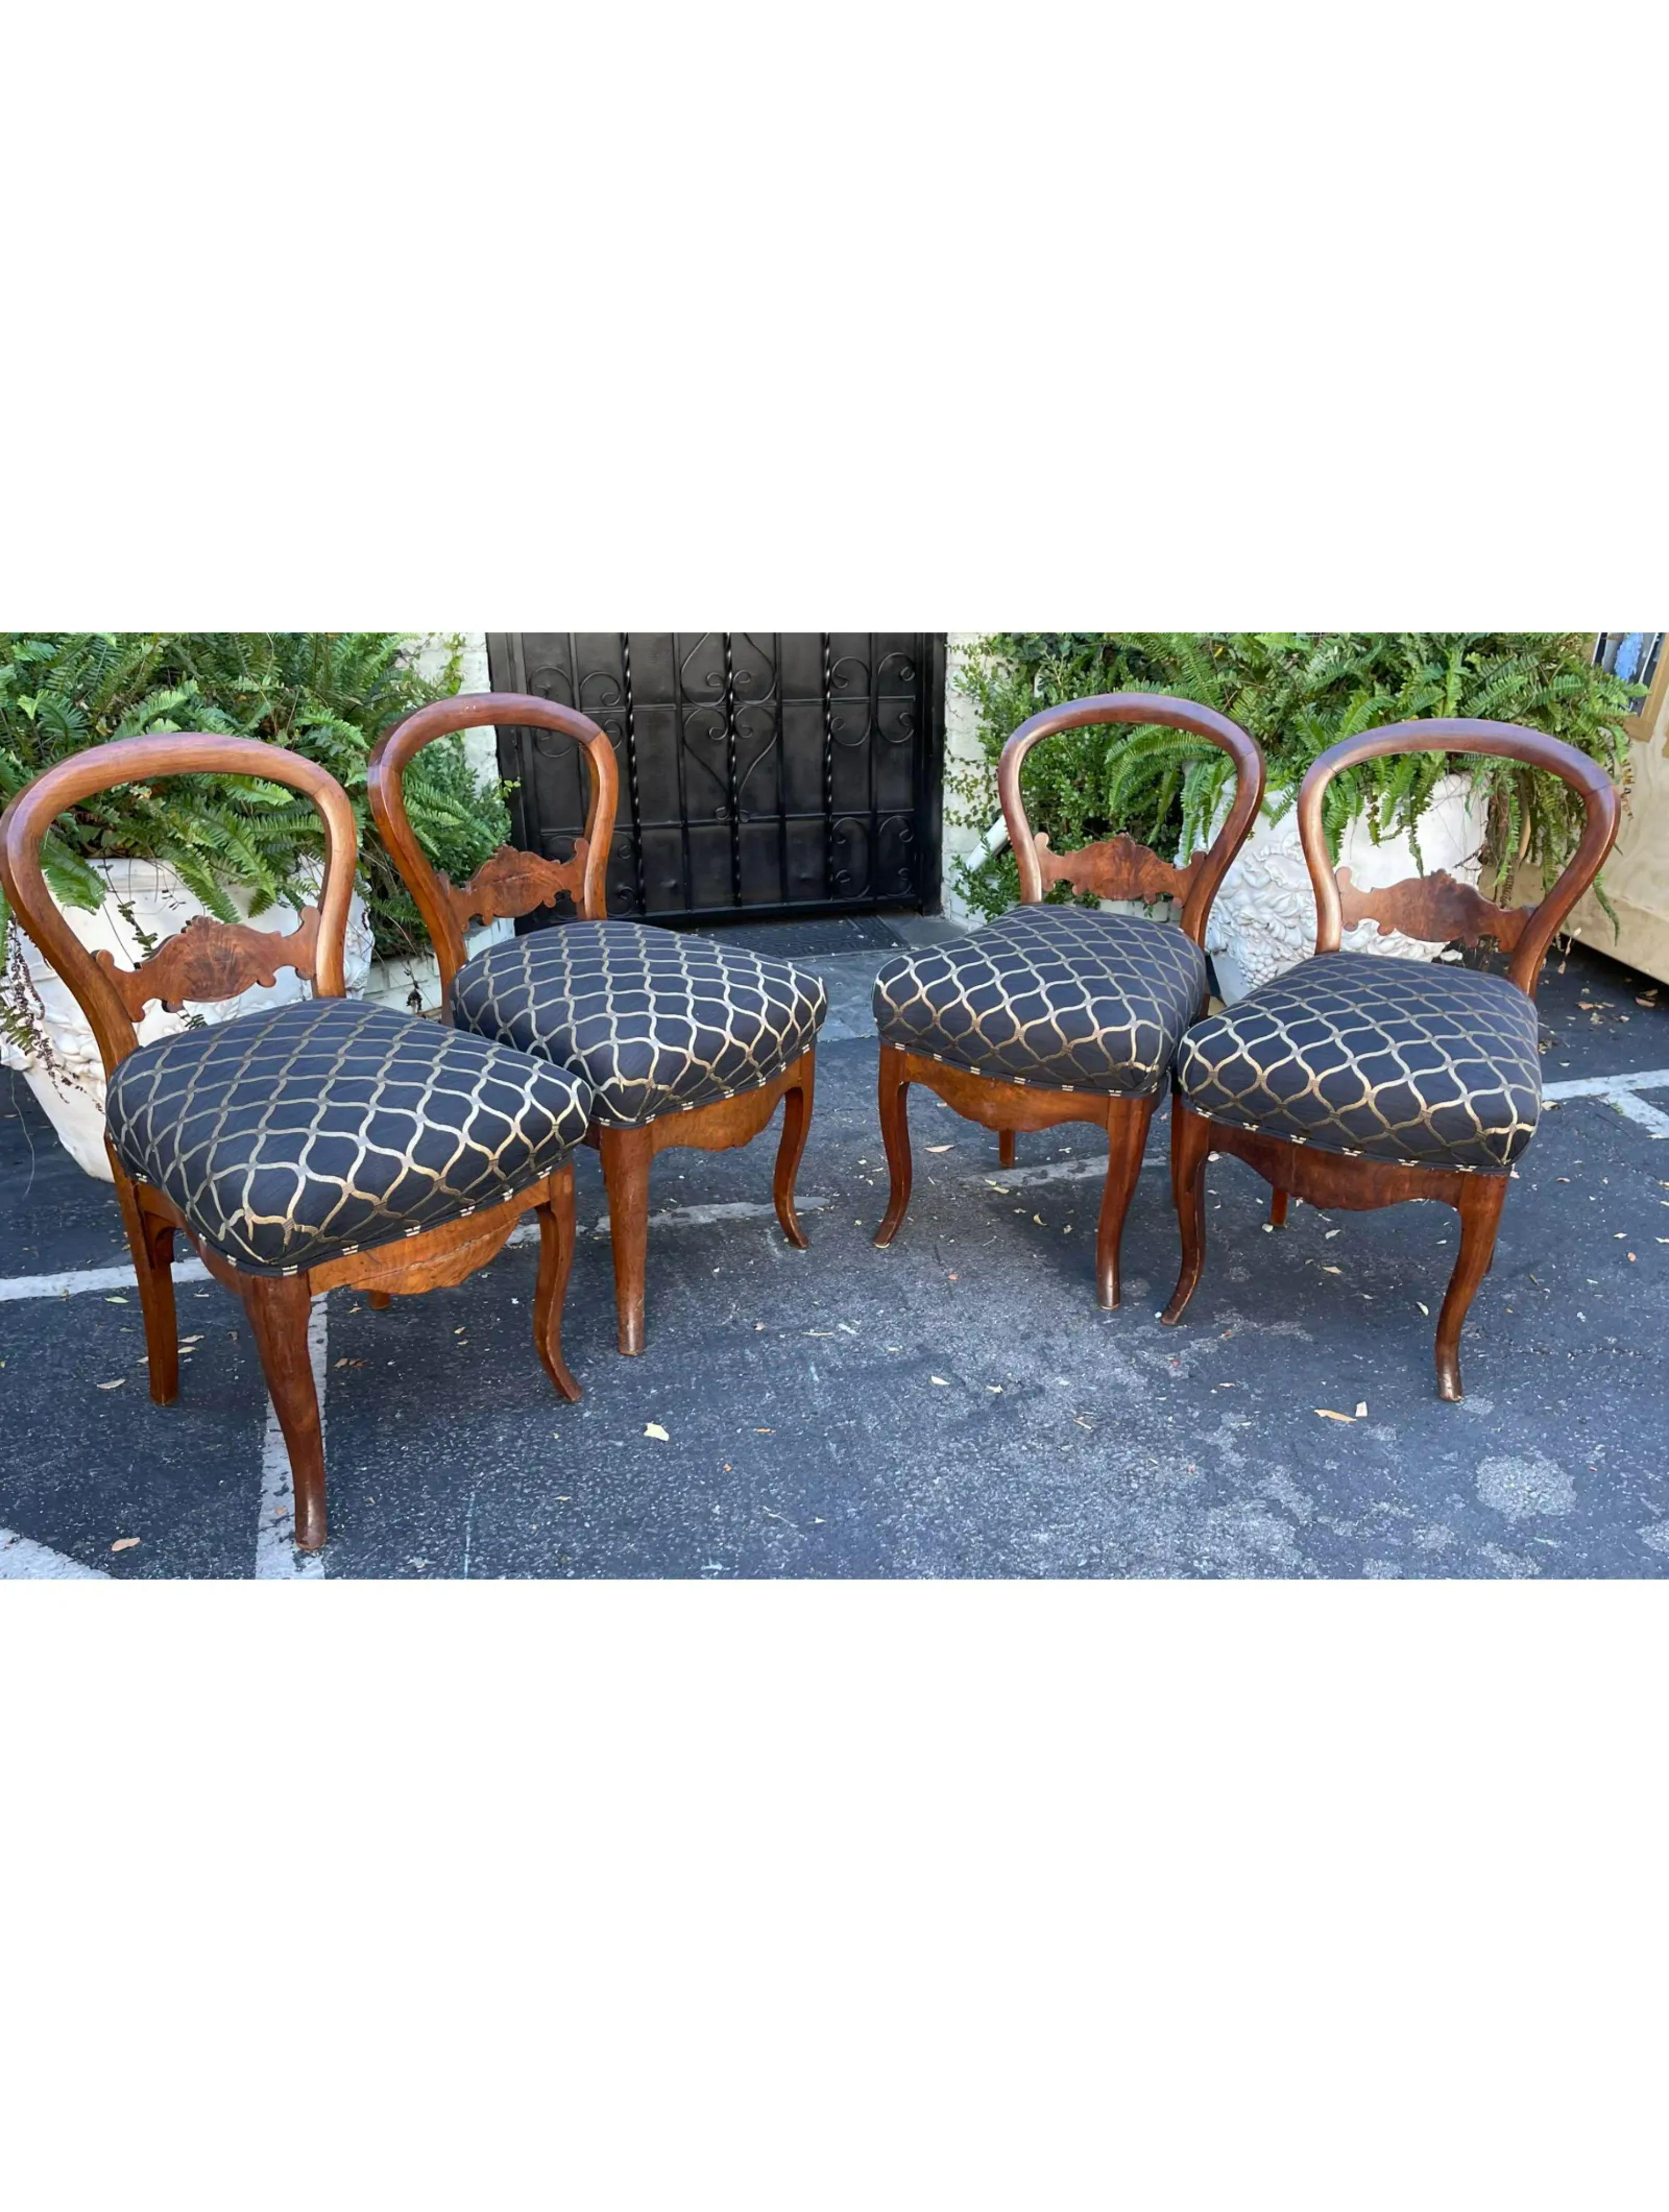 Antique Regency Period Mahogany Dining Chairs, Early 19th Century In Good Condition For Sale In LOS ANGELES, CA